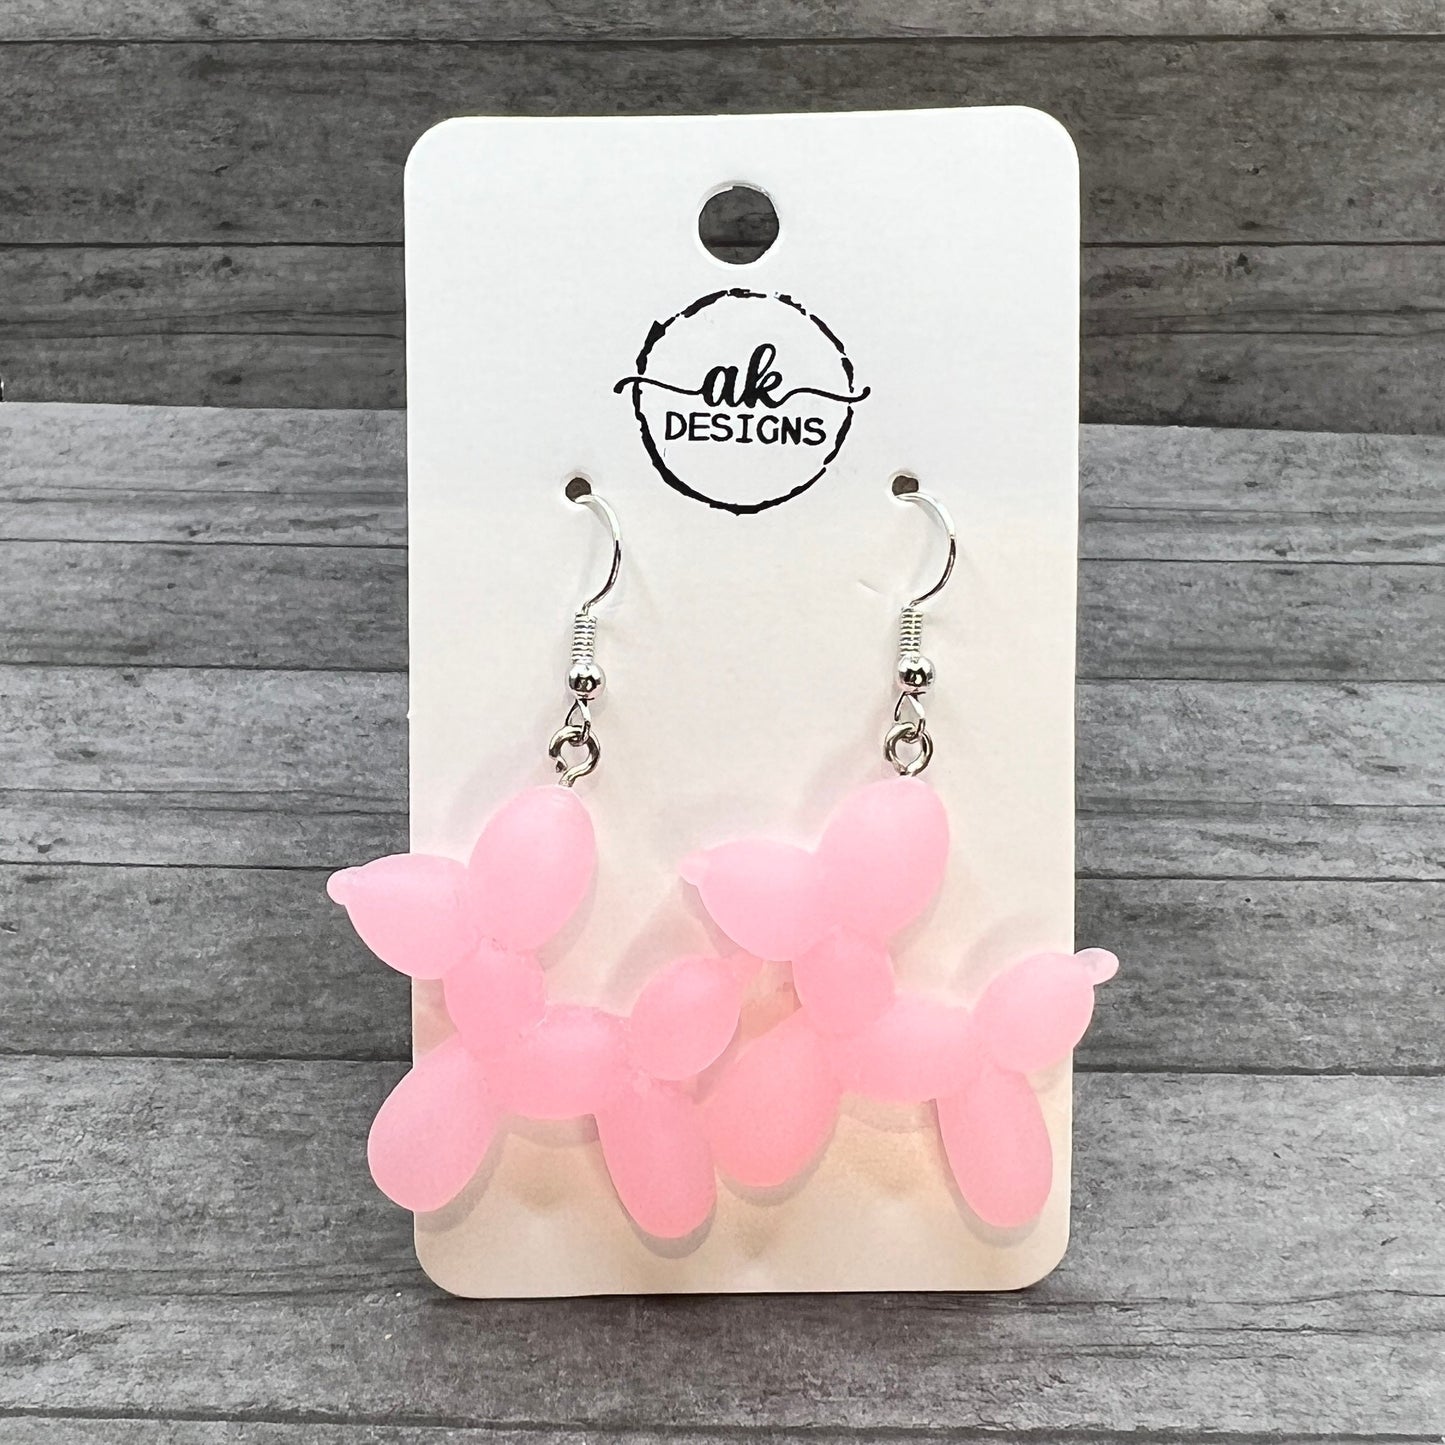 Fun and Whimsical Balloon Dog Earrings, Add Color to Your Style with These Resin Earrings, Perfect Gift for Her